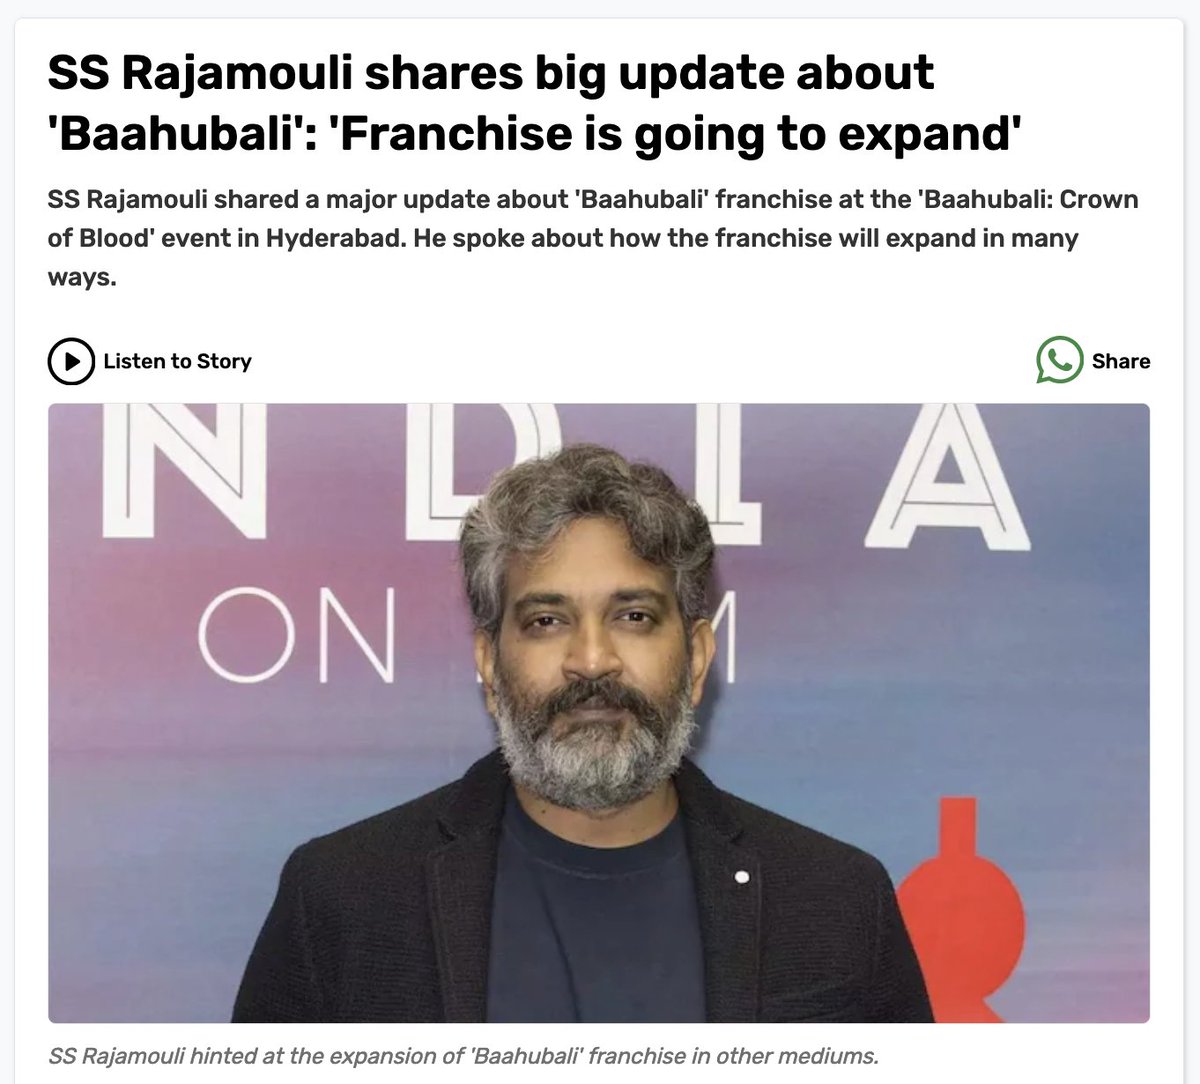 Filmmaker SS Rajamouli, at the 'Baahubali: Crown of Blood' event in Hyderabad, revealed that the franchise is going to expand in many mediums. The director attended the pre-launch event of the upcoming 'Baahubali' animated series at AMB Cinemas in Hyderabad.